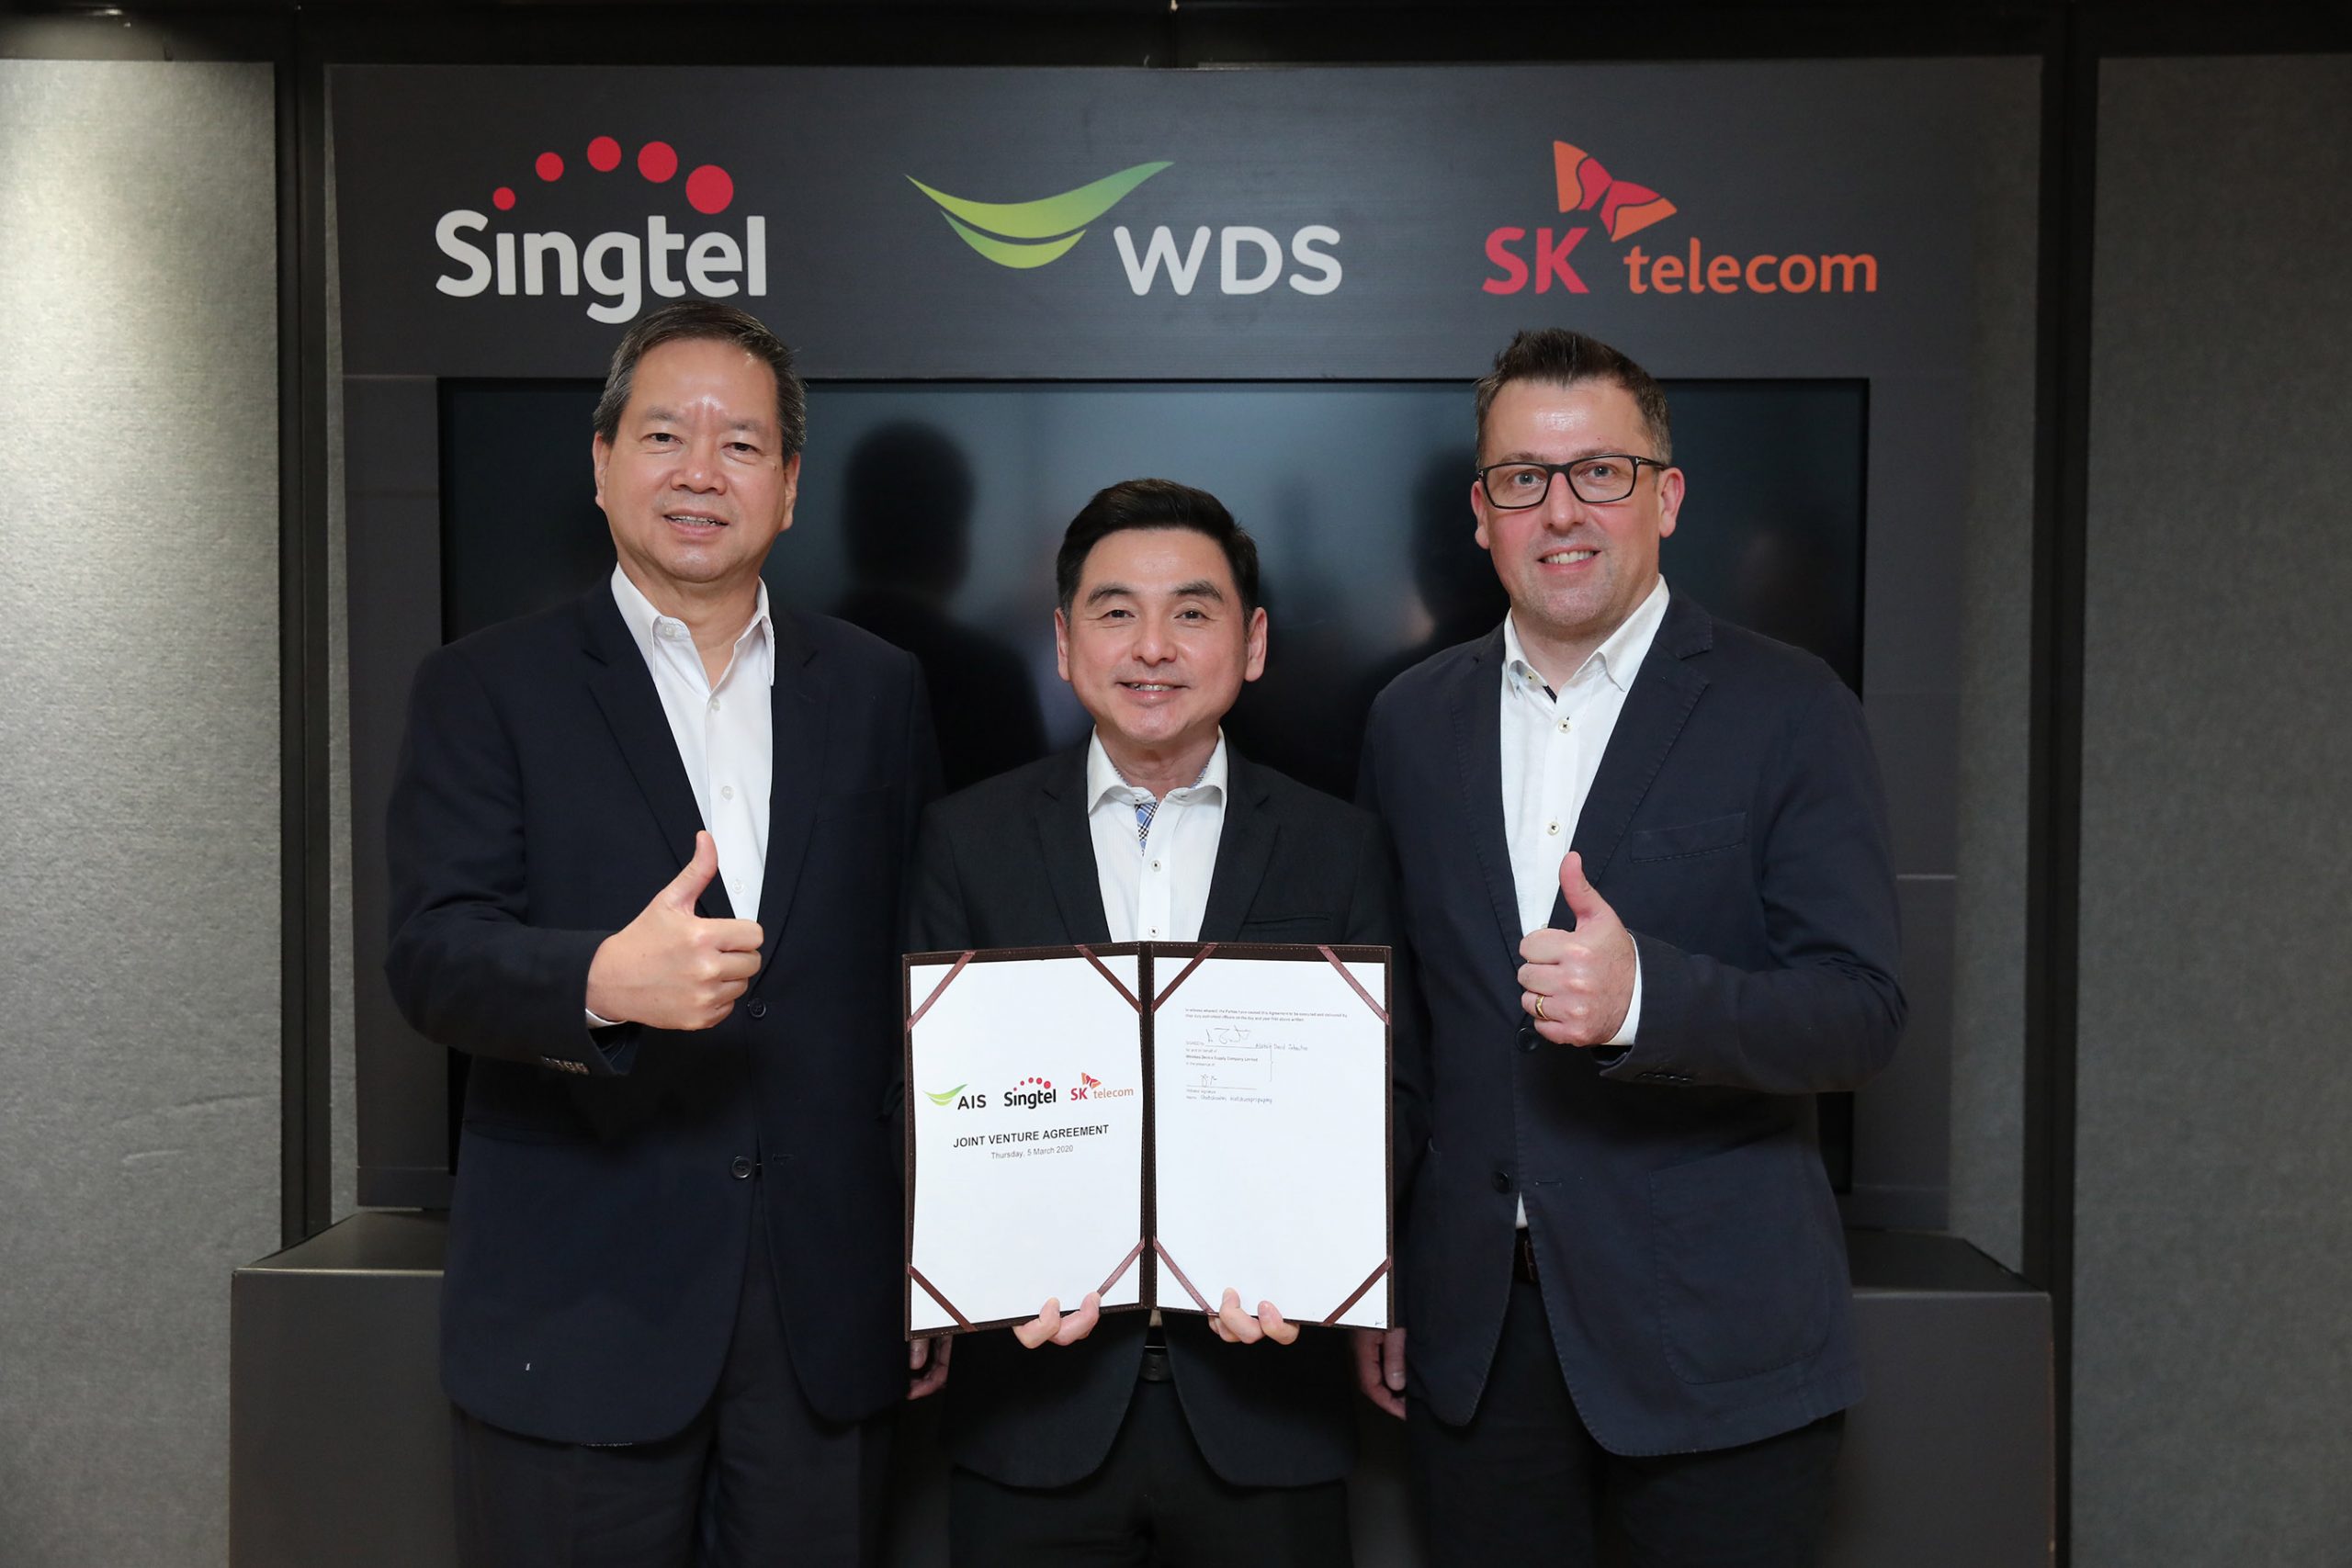 wds-singtel-subsidiary-of-ais-and-sk-telecom-invest-new-gaming-esports